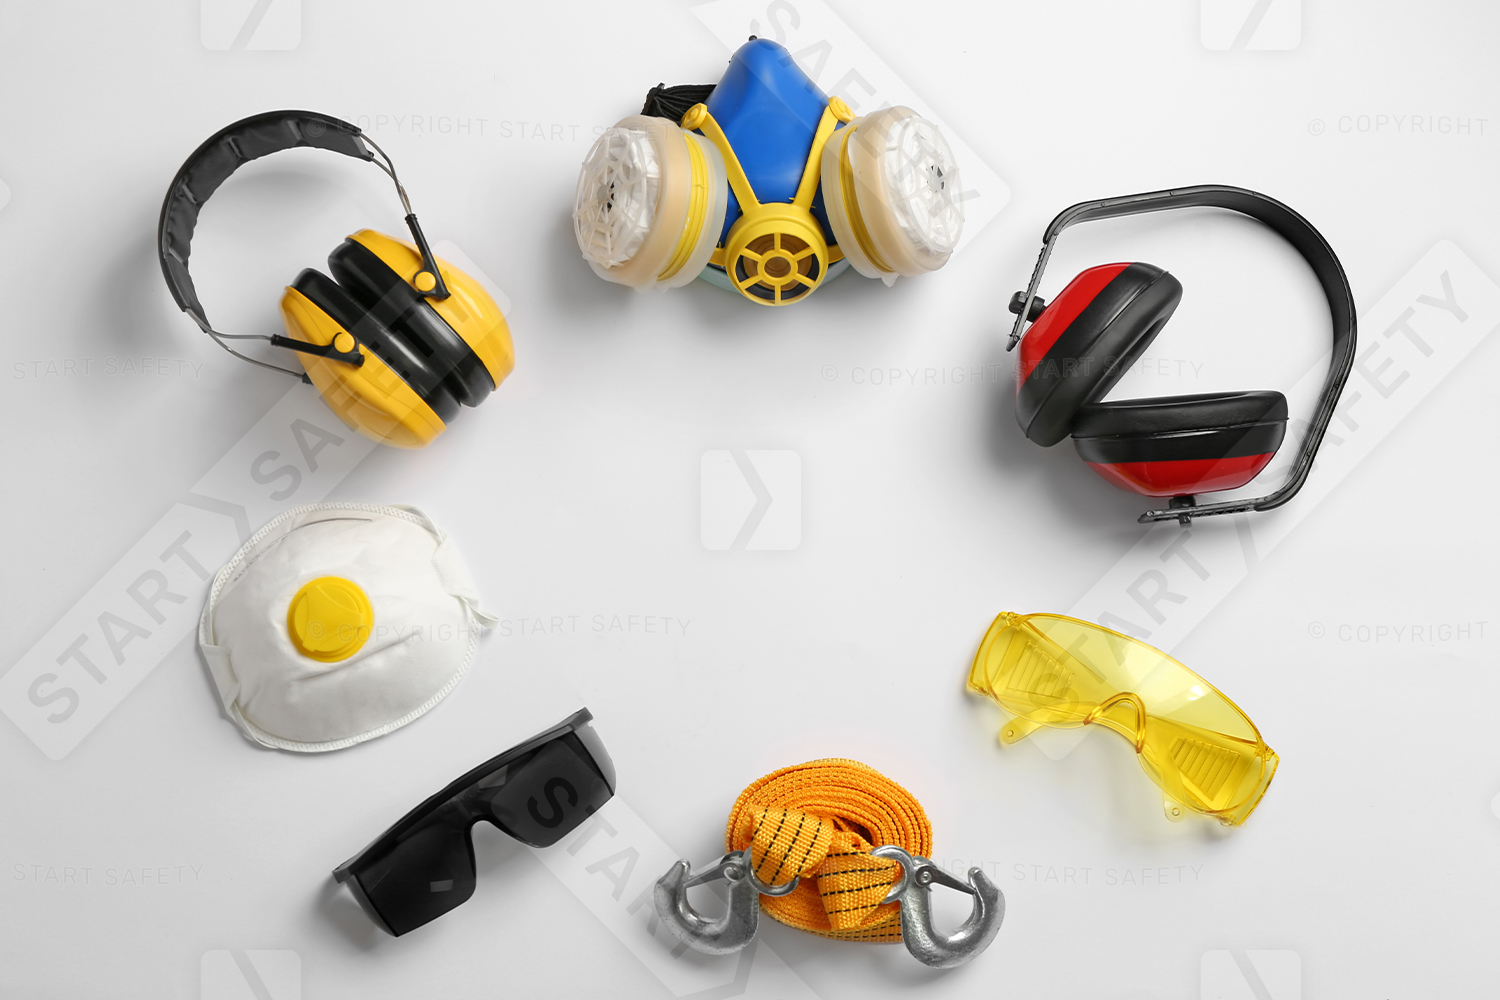 Range of PPE products